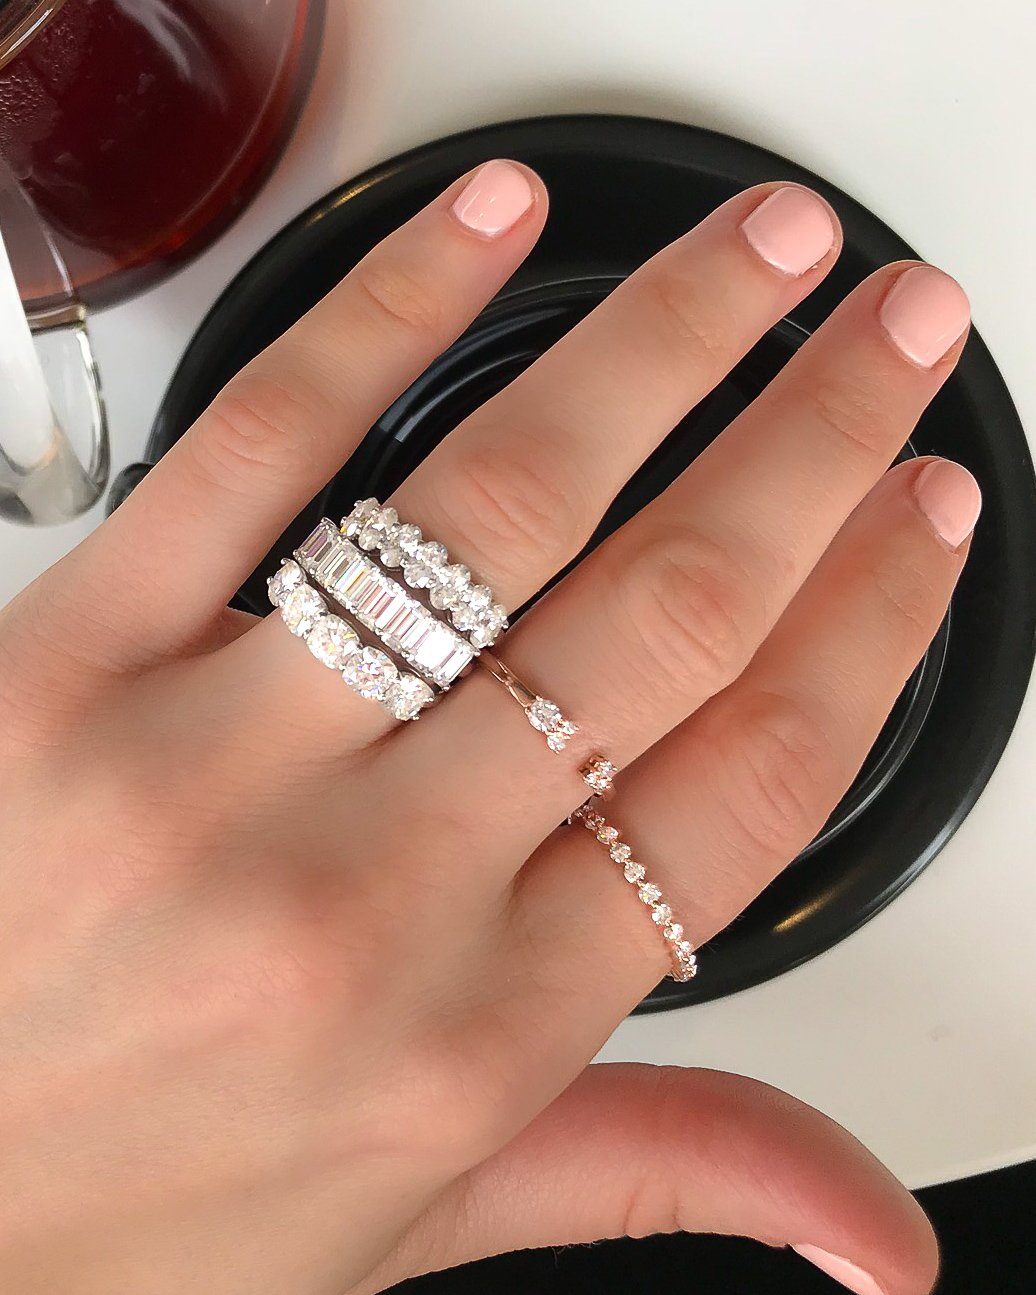 Cushion Cut Constellation Eternity Band by Good Stone available in Gold and Platinum